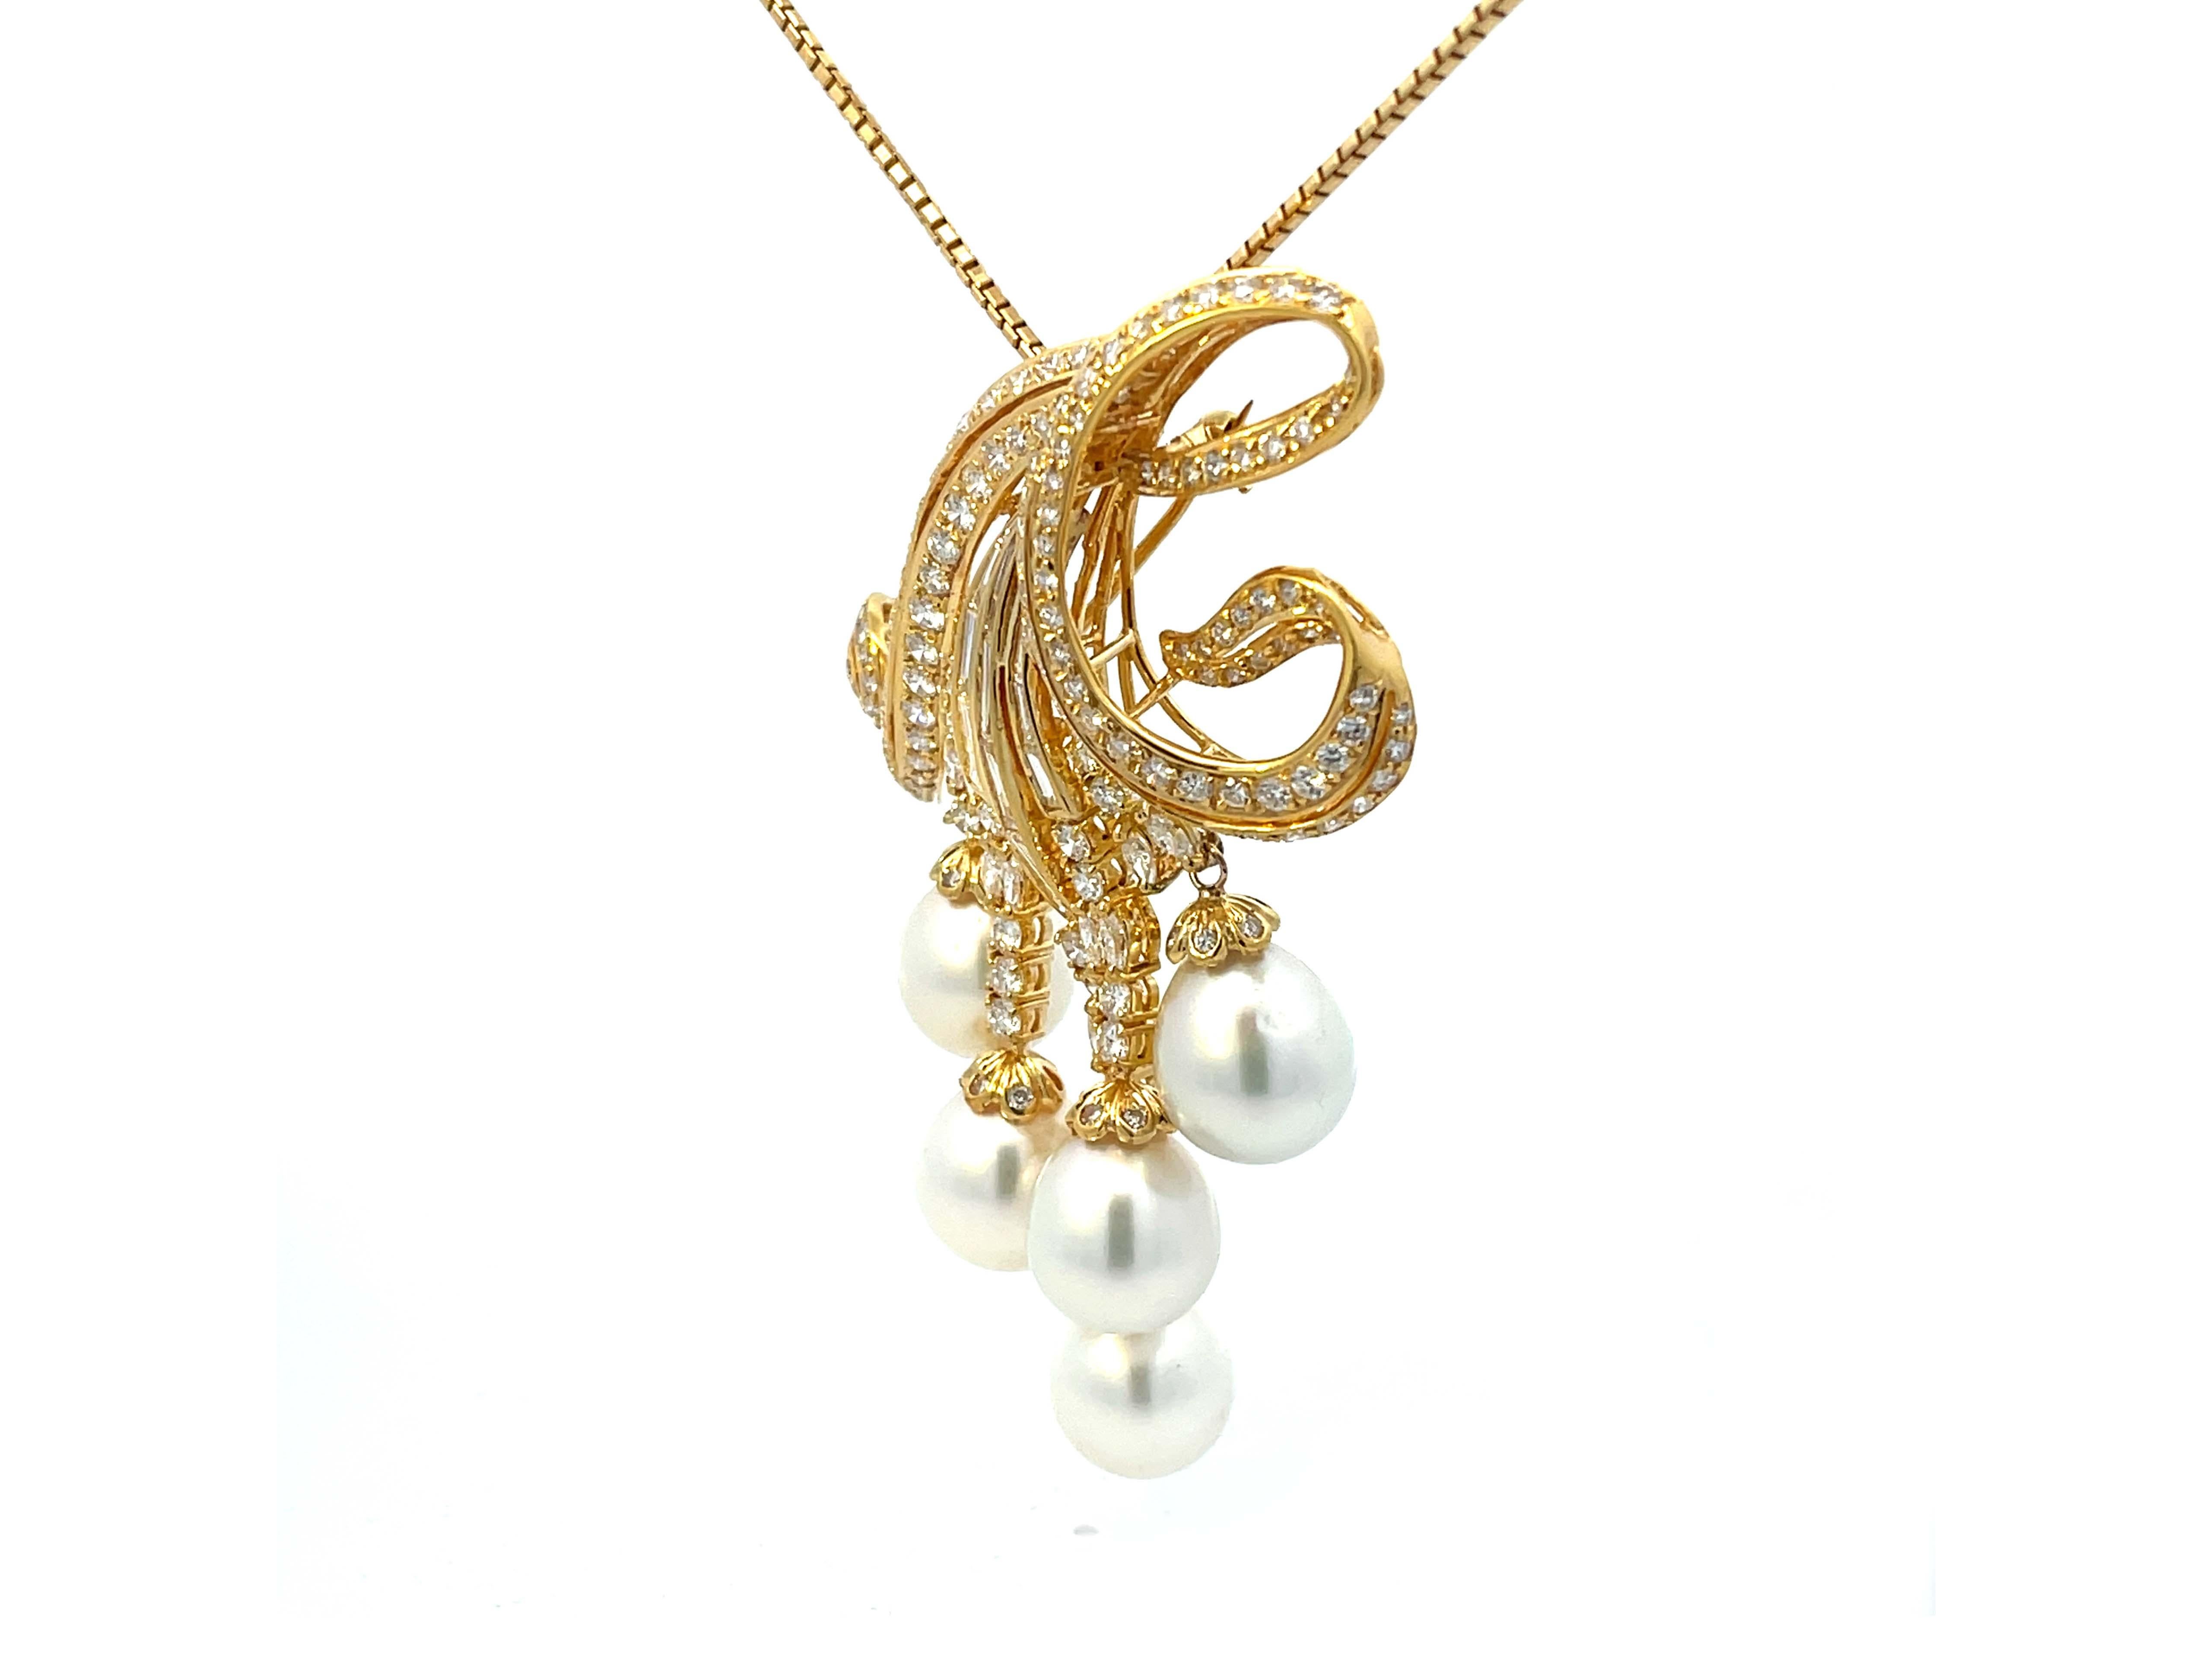 Brilliant Cut Large Diamond and Pearl Necklace in 18k Yellow Gold For Sale